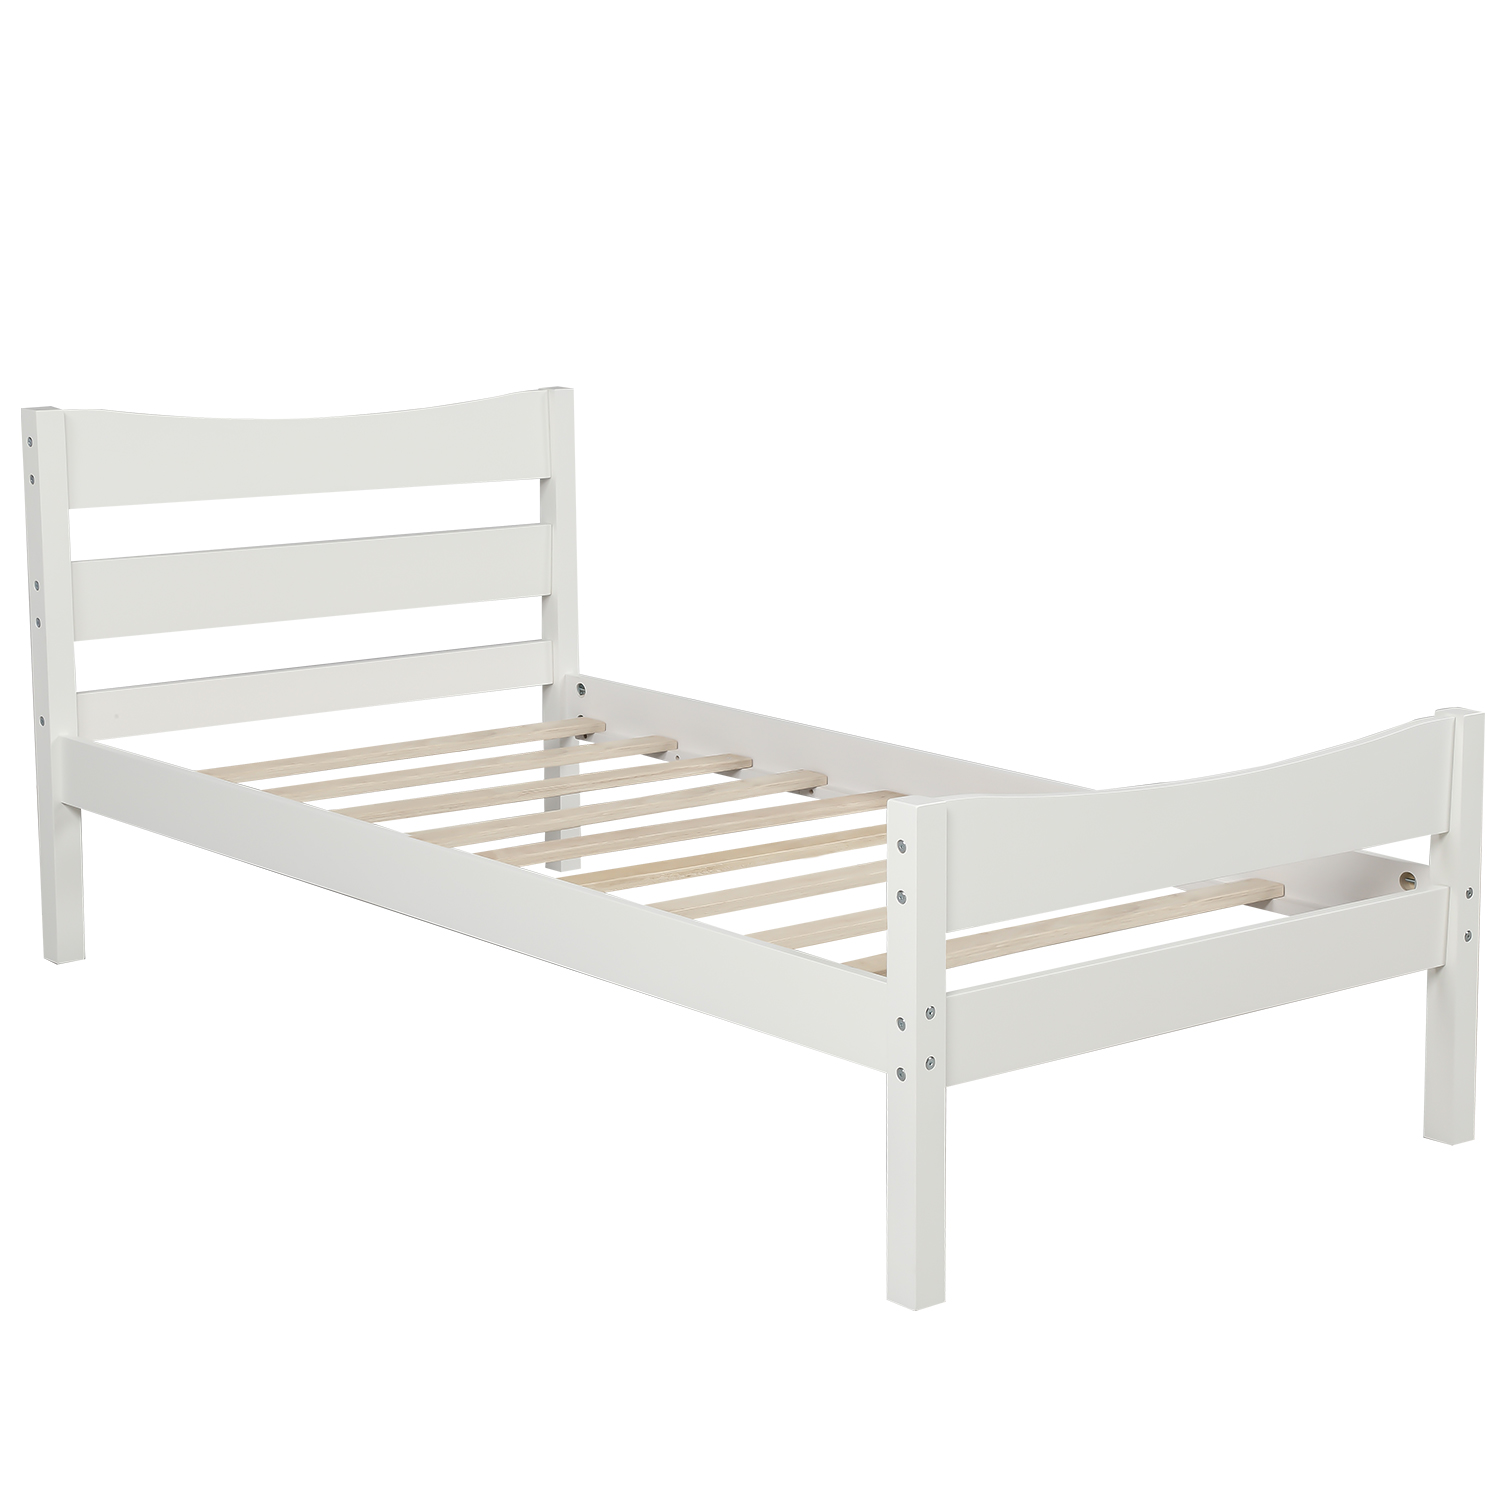 Twin-Size Wood Platform Bed with Headboard and Slat By: Alabama Beds